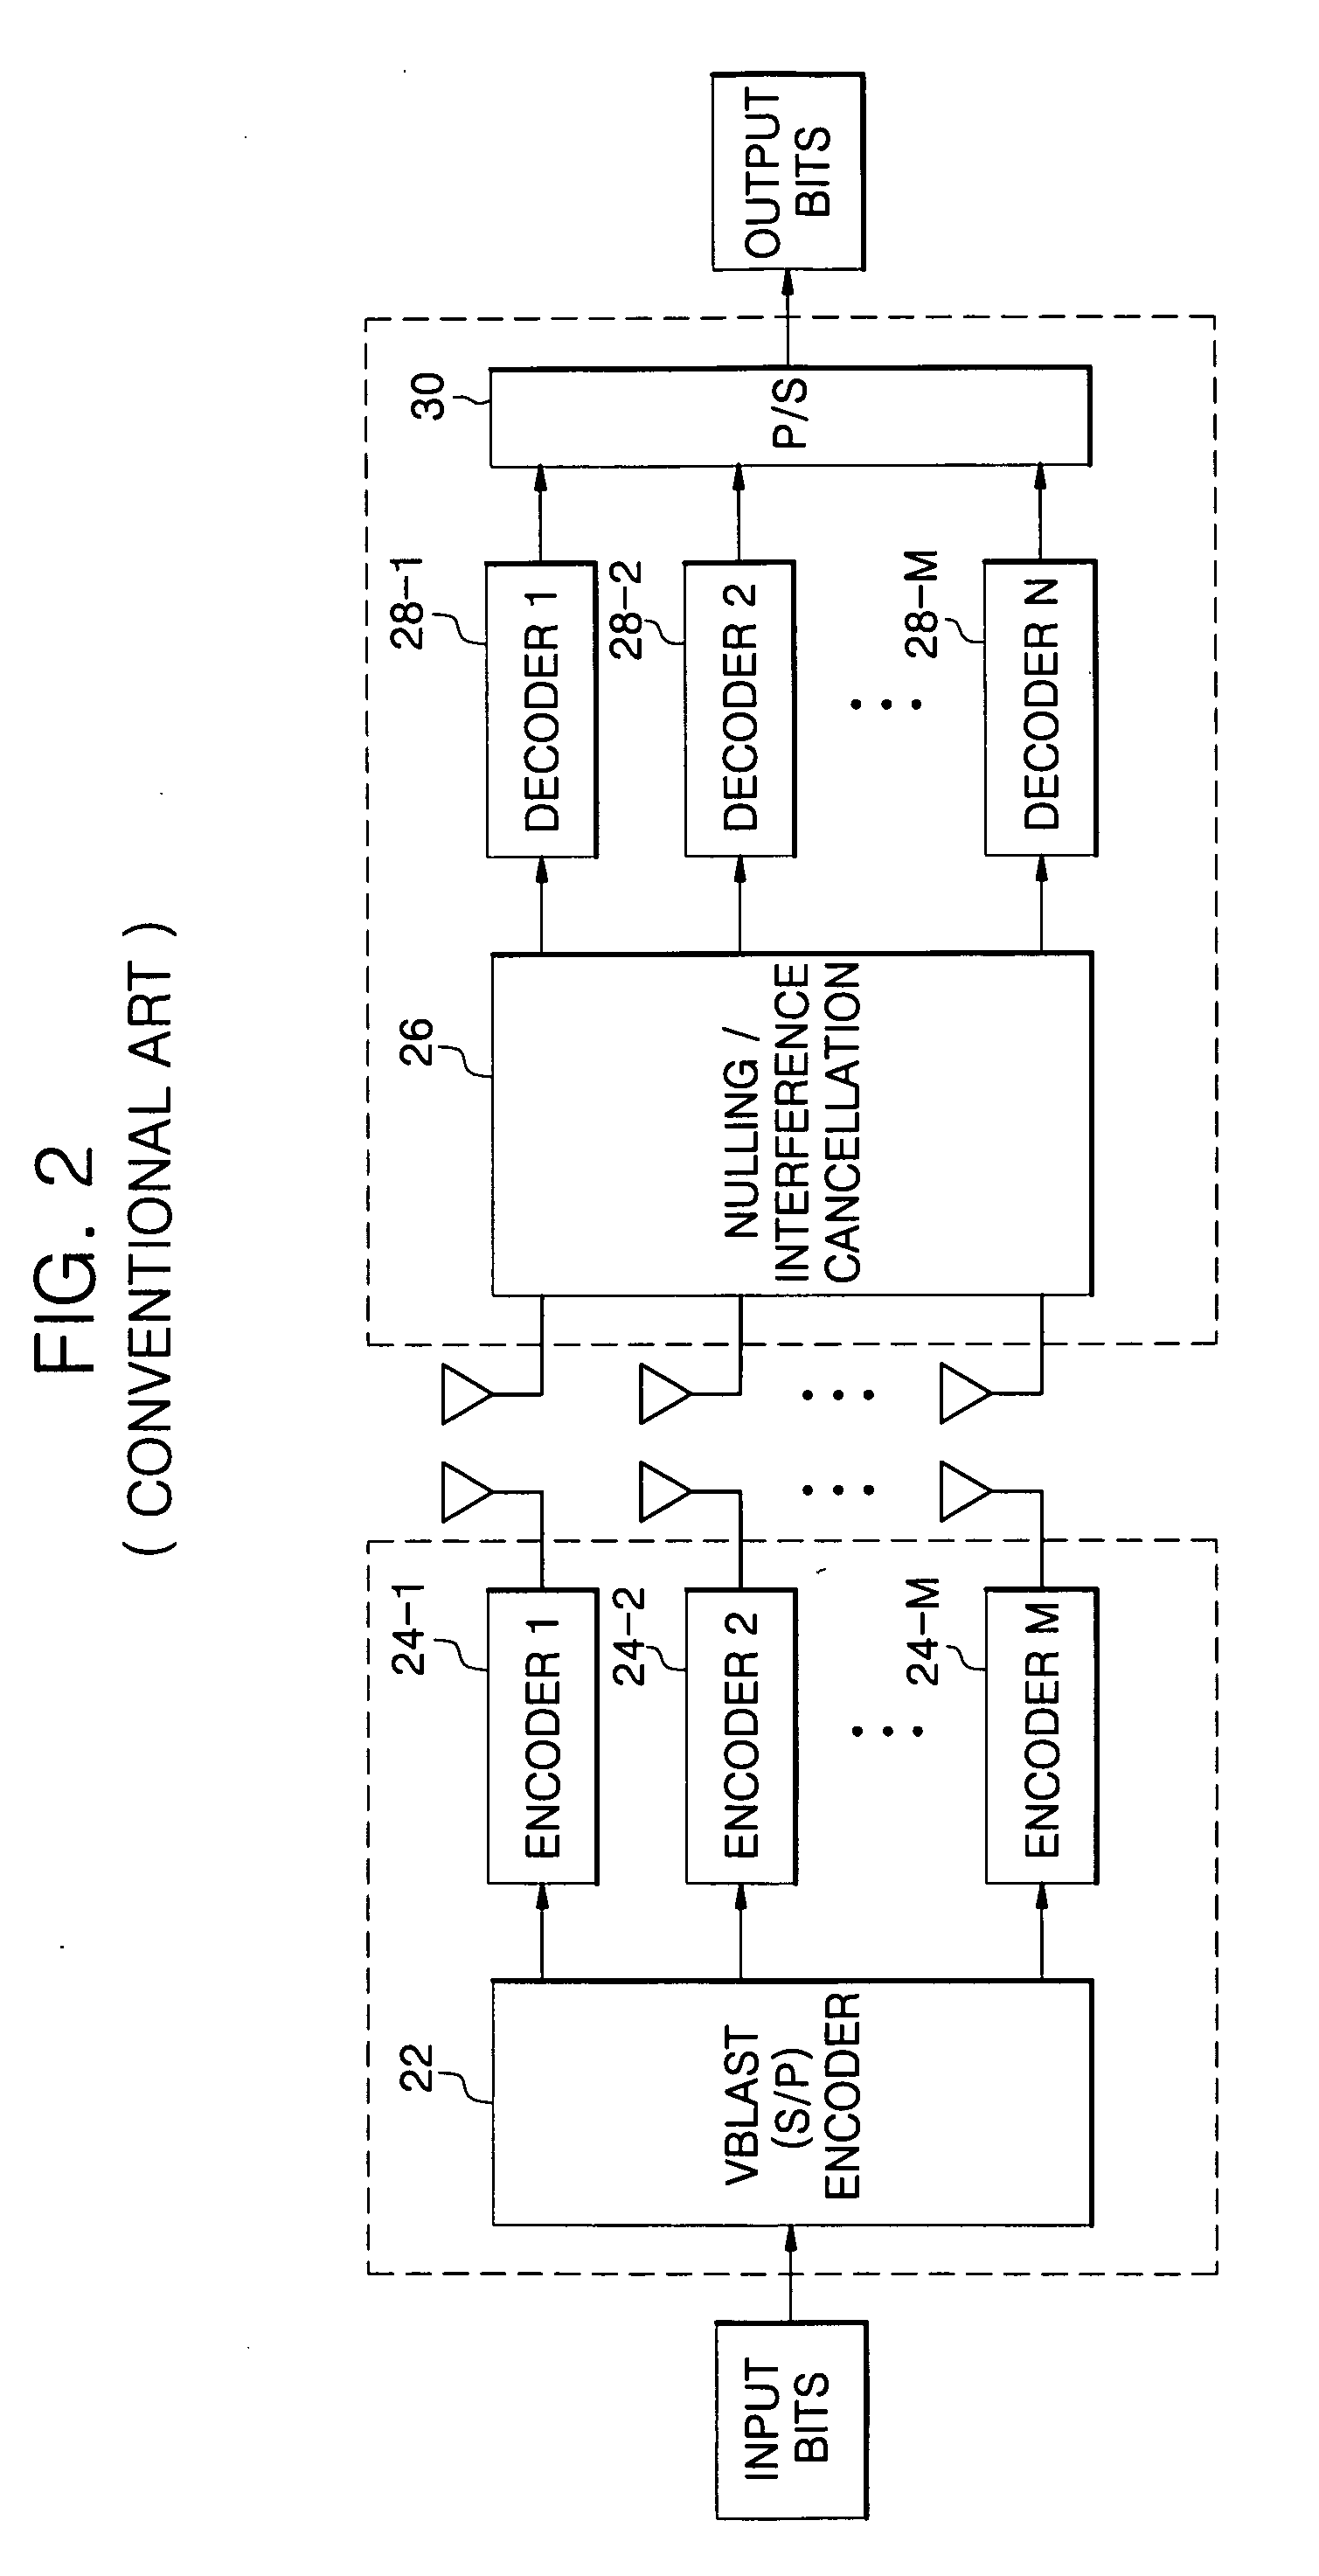 Method of adaptive transmission in an orthogonal frequency division multiplexing system with multiple antennas